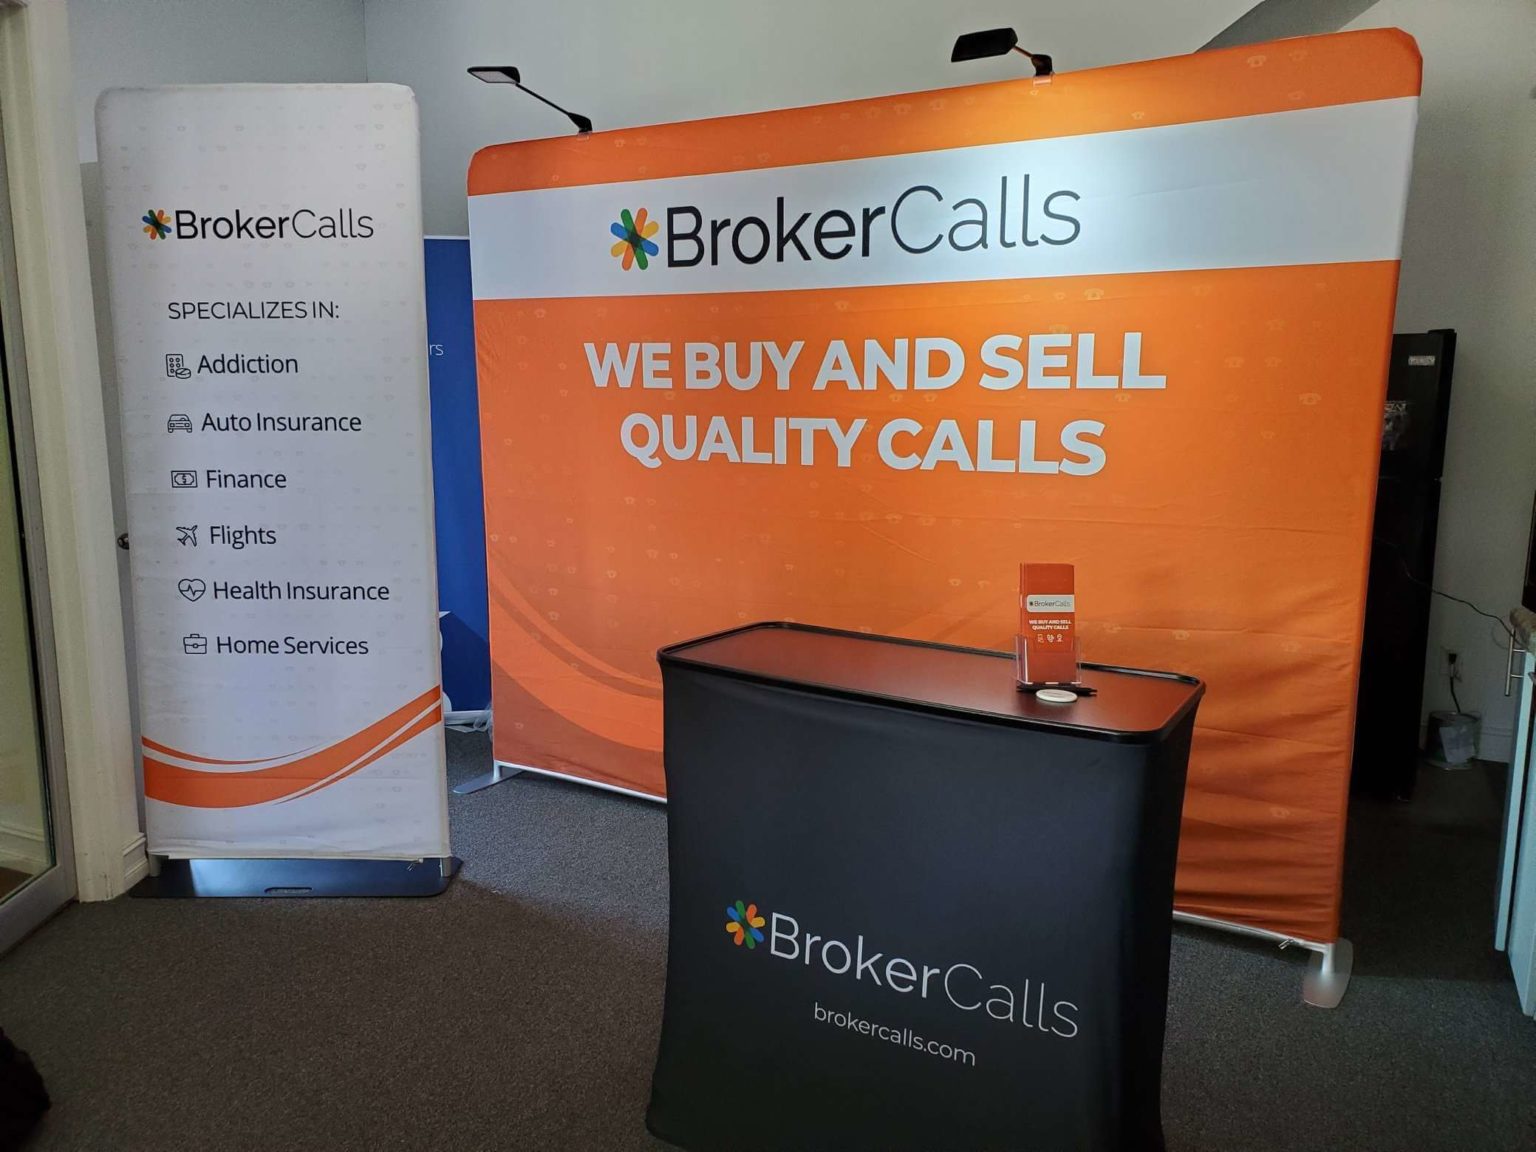 Interact With the BrokerCalls Team During Affiliate Summit in Las Vegas